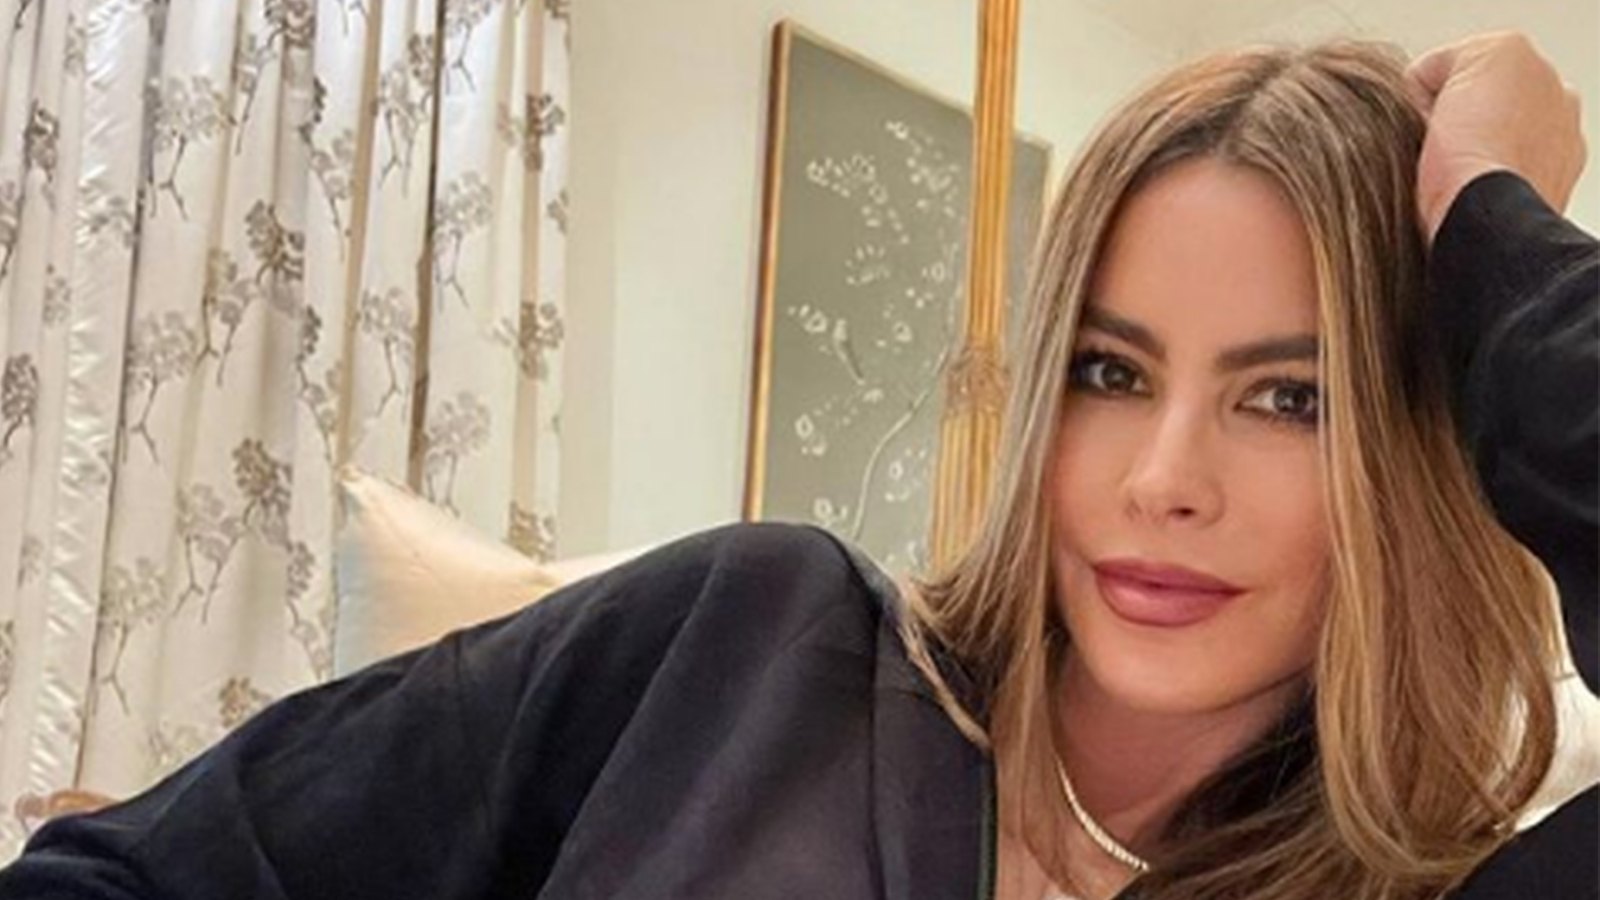 AGT's Sofia Vergara, 51, showcases incredible physique in $30 Walmart jeans  after hot date with surgeon